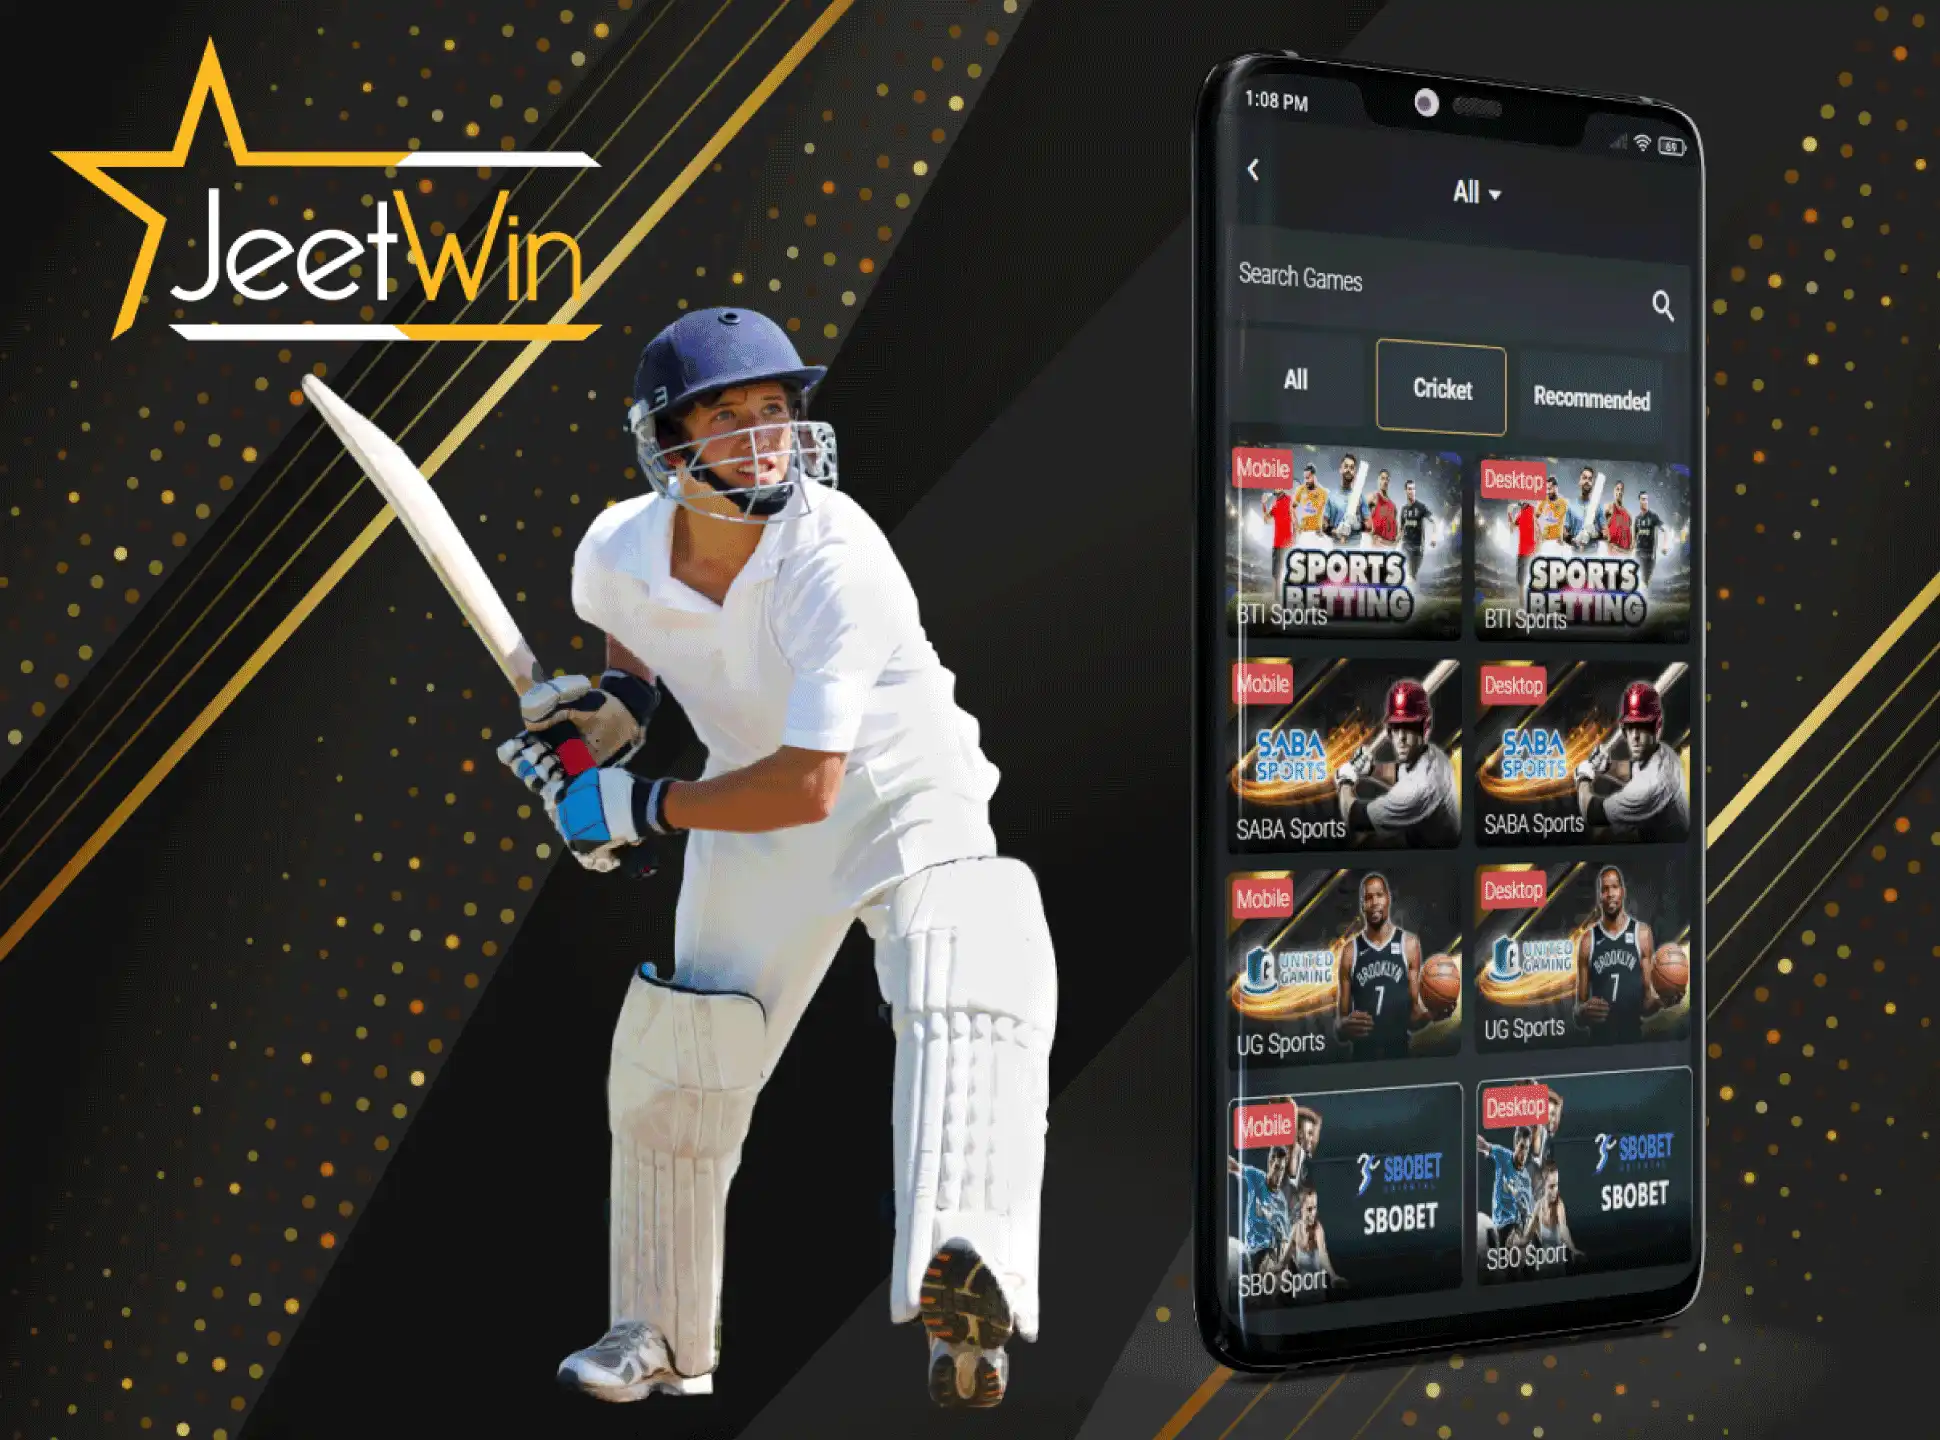 You can bet on cricket via the JeetWin mobile app.